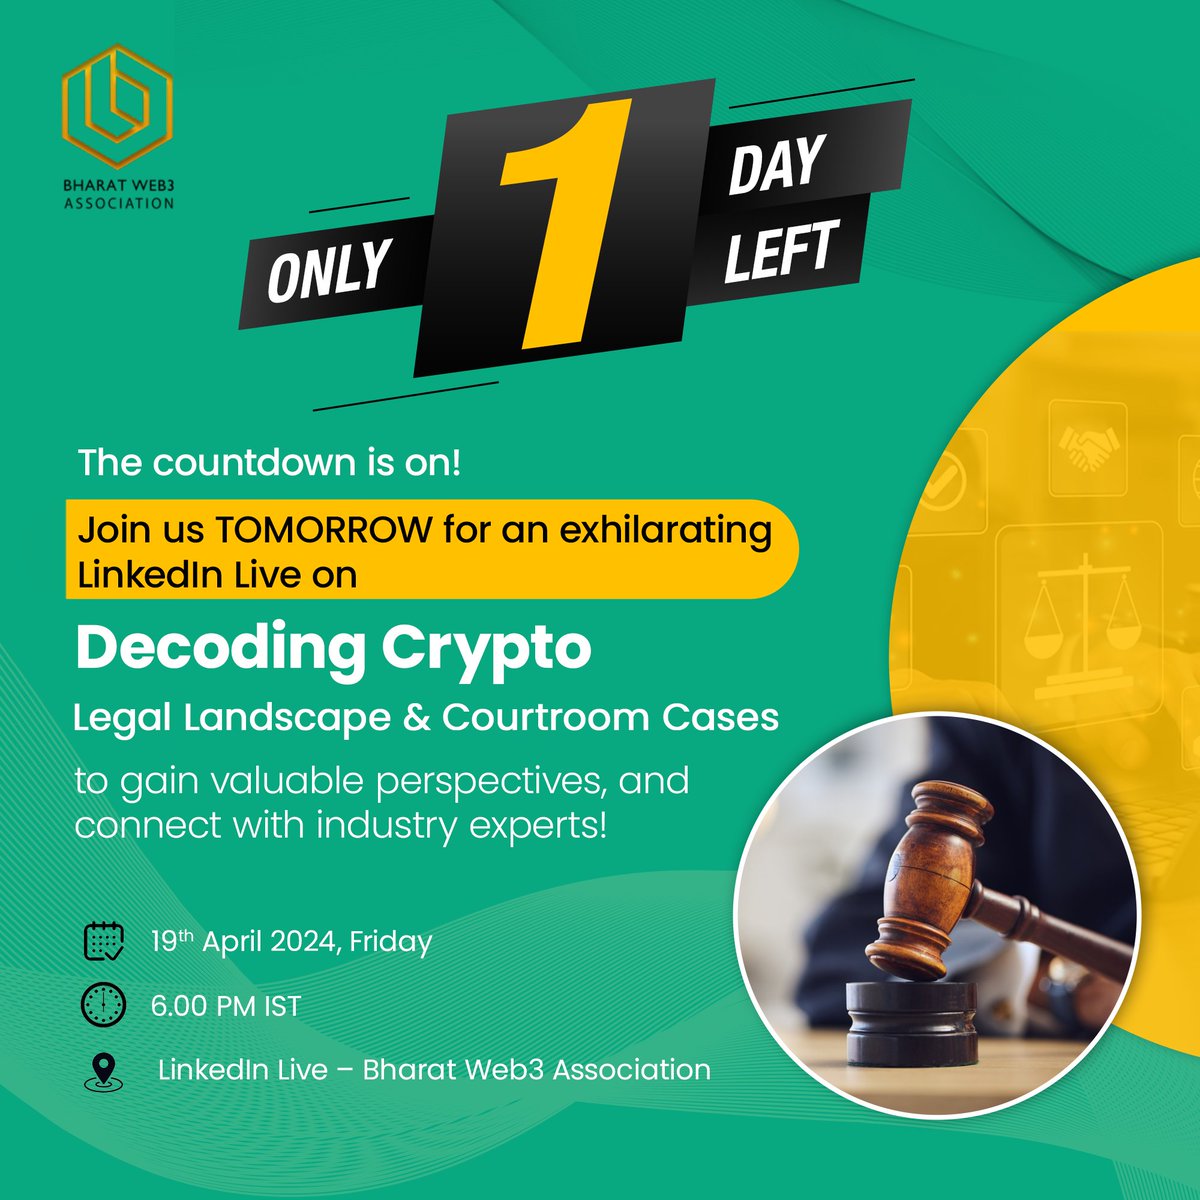 📌Only 1 Day to go!

For our LinkedIn Live session on 'Decoding Crypto: Legal Landscape & Courtroom Cases'.
See you all there!  

Date: 19th April, Friday
Time: 6:00 PM IST
Join here: lnkd.in/gcWsCFAQ

#BWA #LinkedInLive #Web3 #event